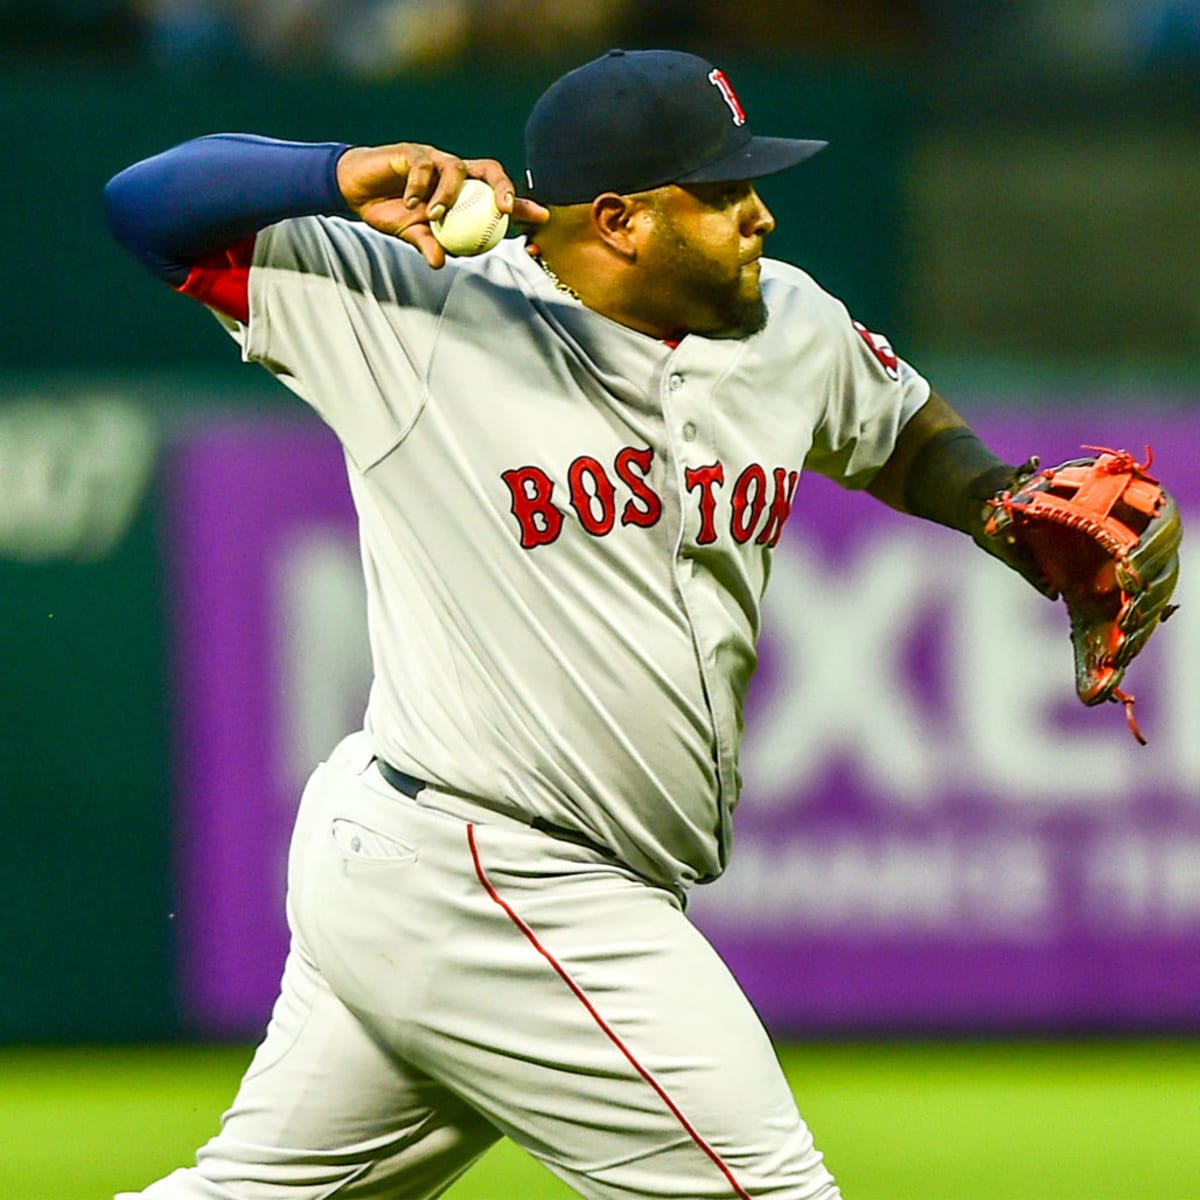 Pablo Sandoval is looking a lot slimmer